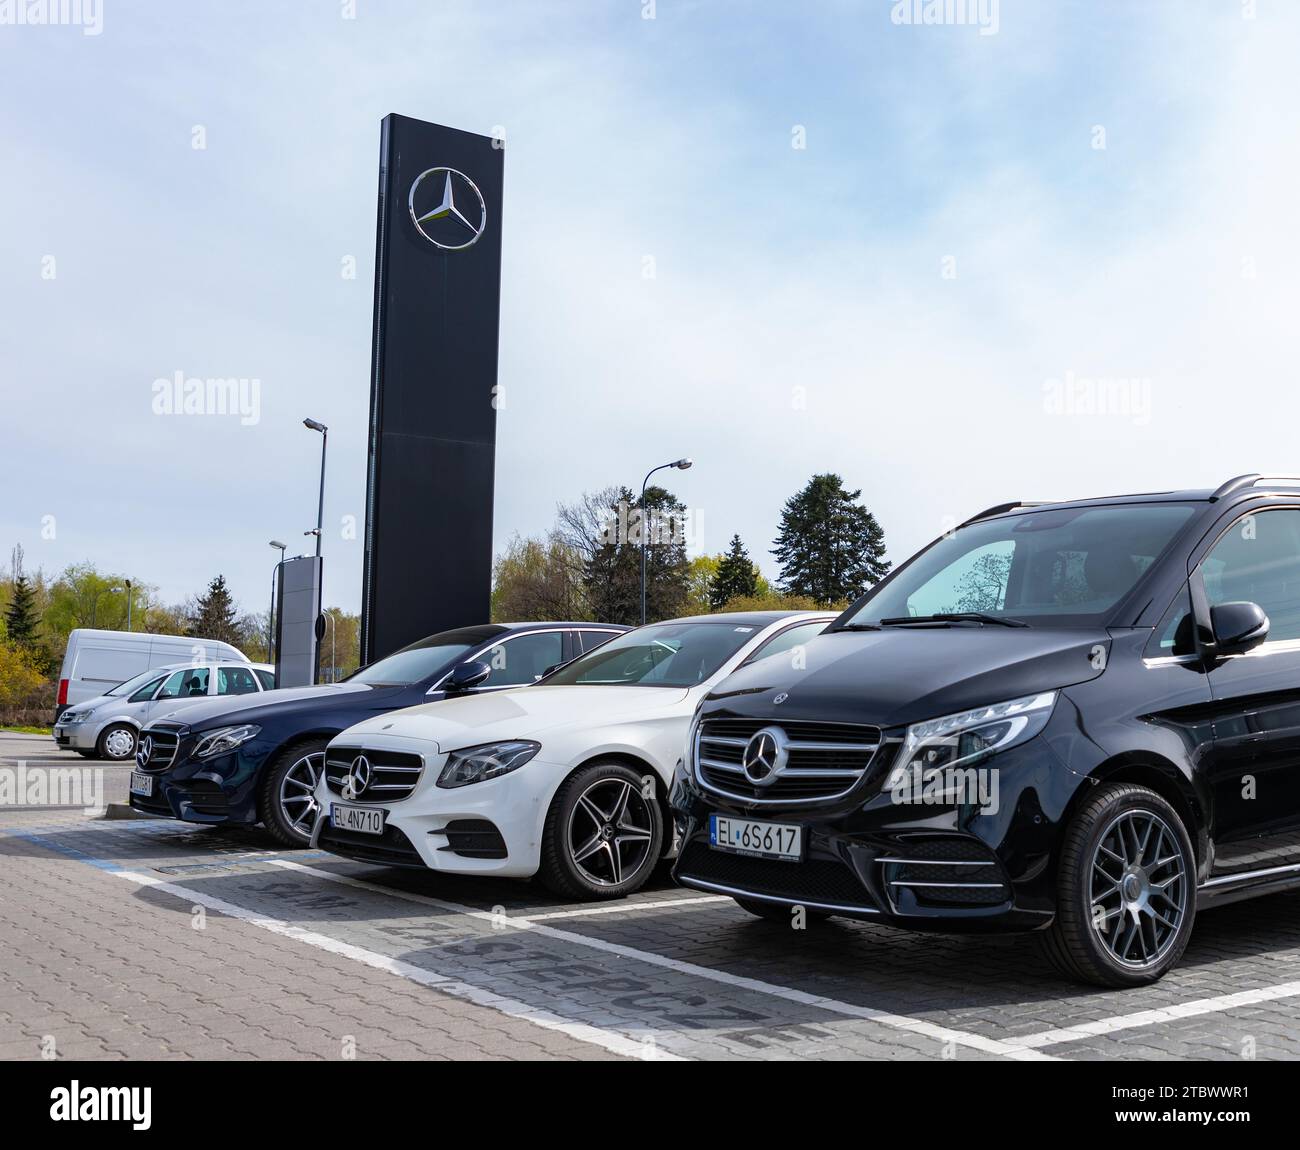 A picture of multiple vehicles at a Mercedes Benz car dealership, in Poland Stock Photo